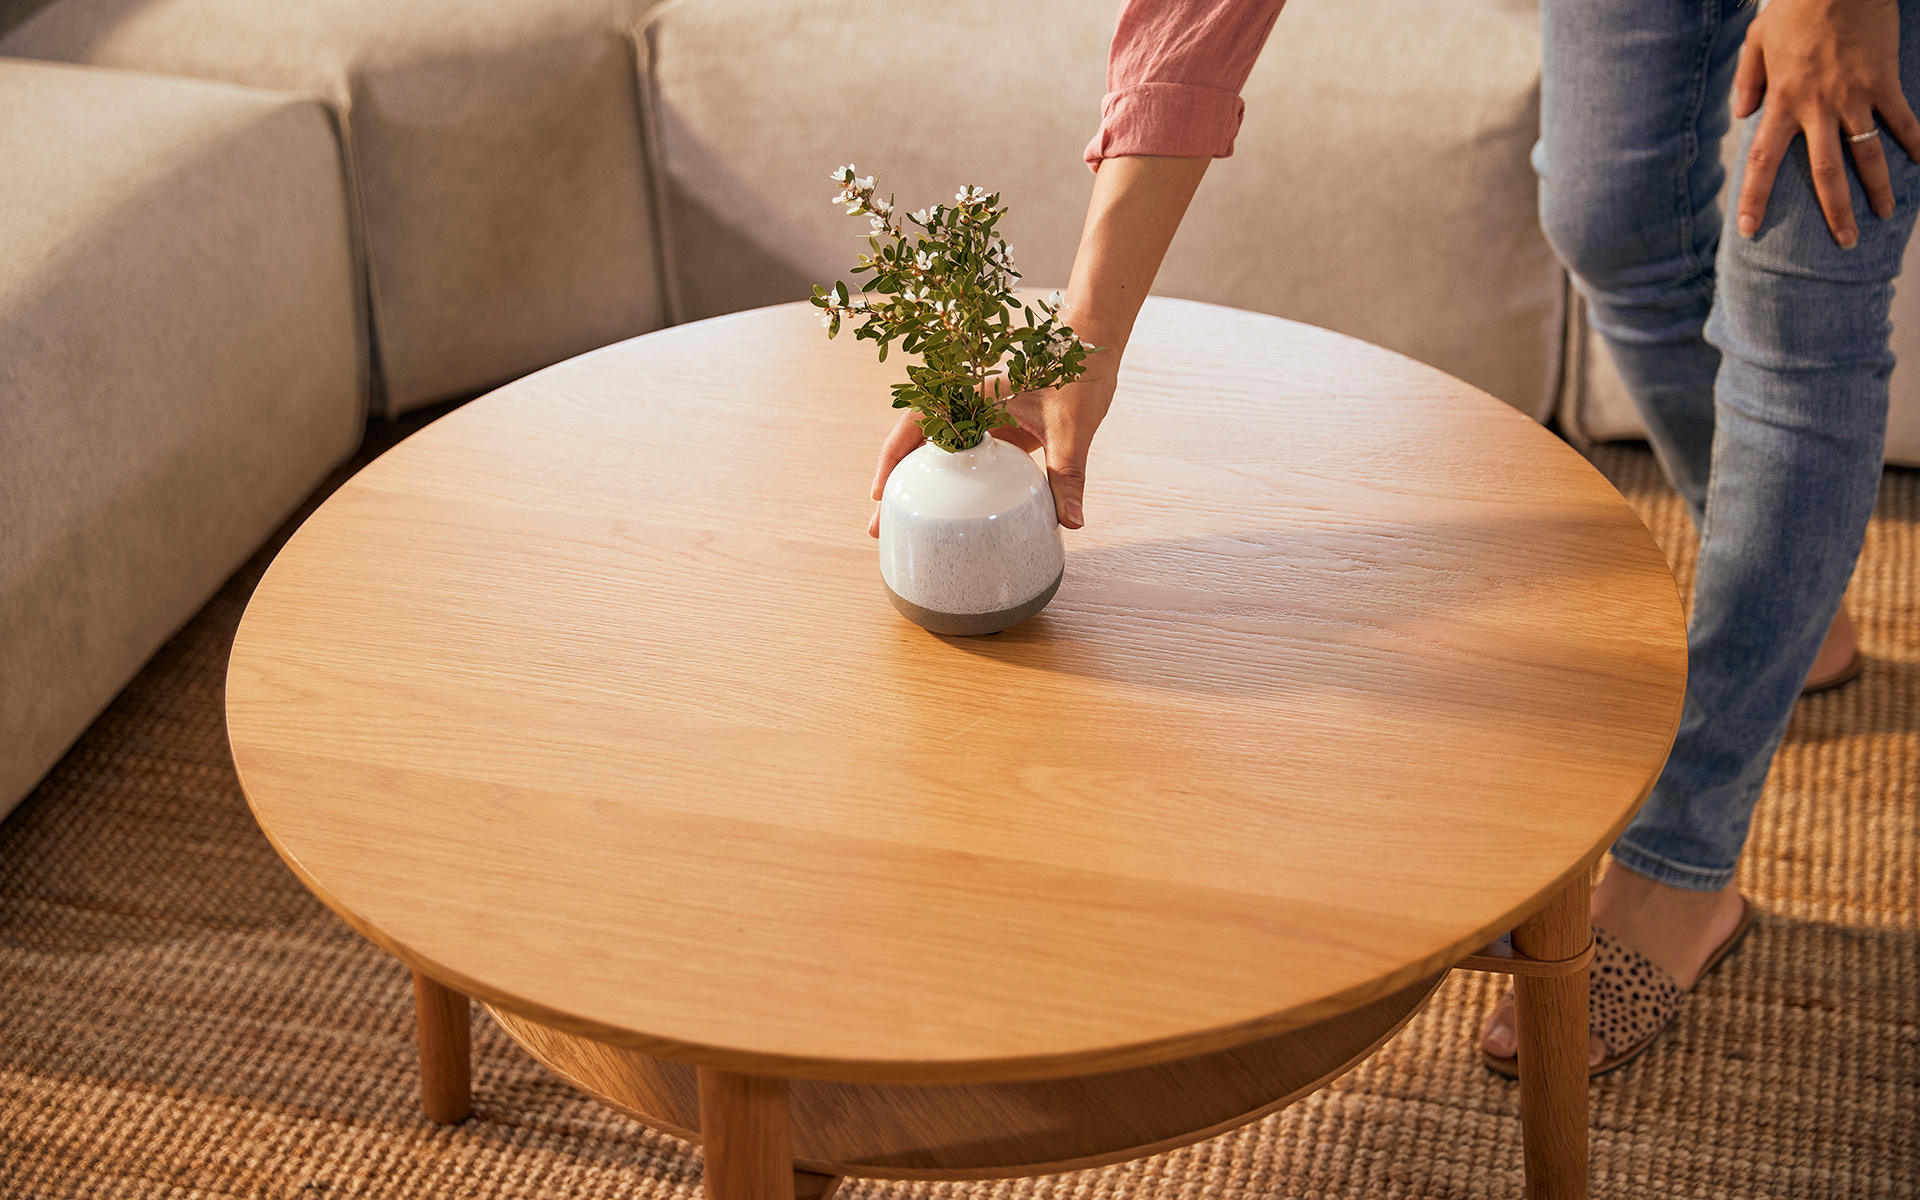 A woman starts decorating her coffee table with a simple vase of flowers